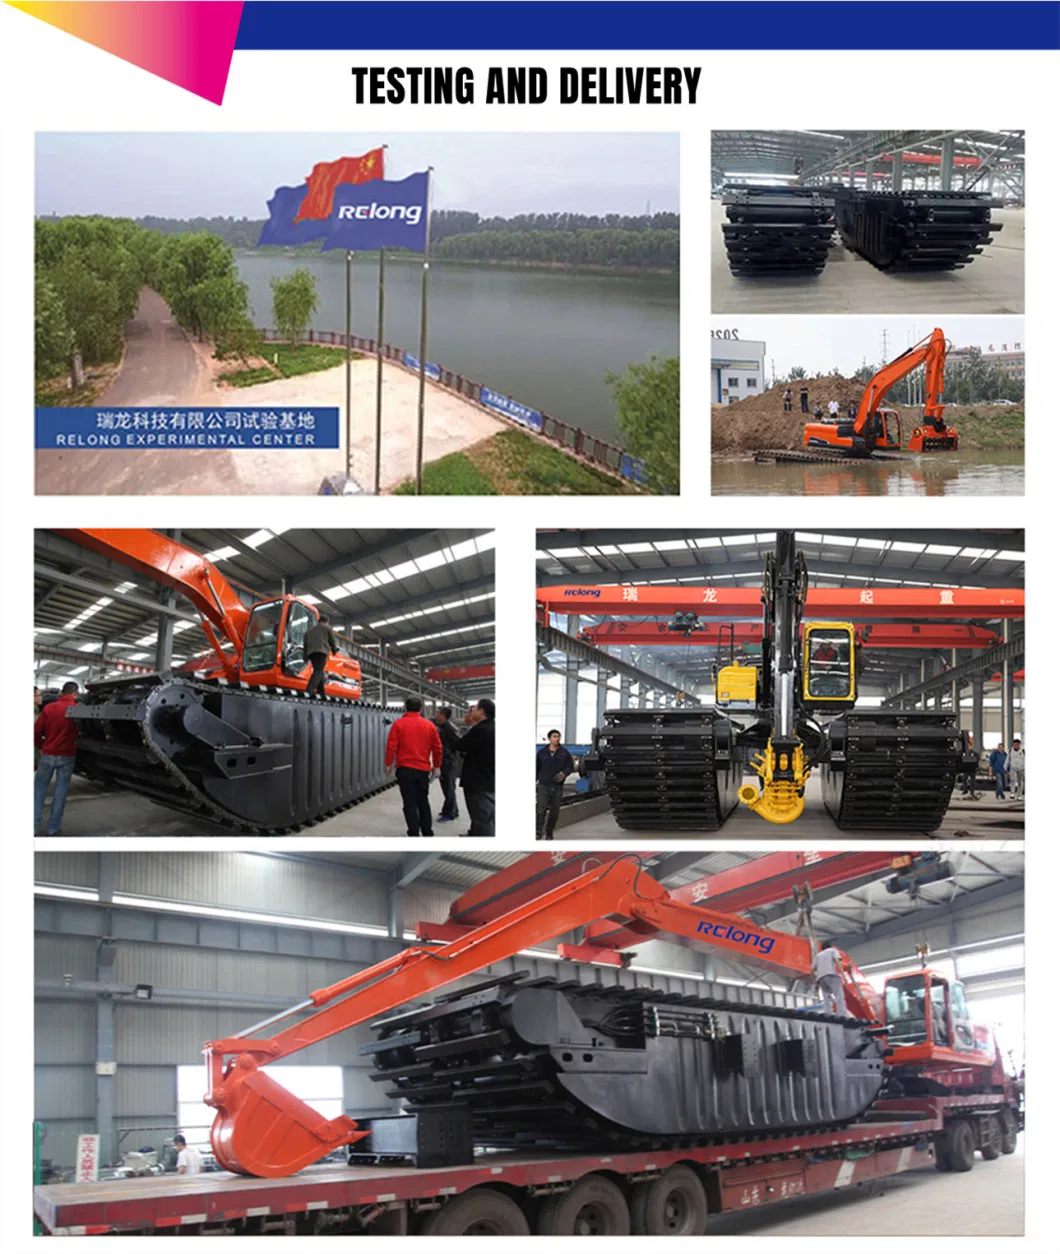 High-Quality Amphibious Excavator with Pontoon Undercarriage Lake Swamp Buggy Excavator for Dredging in The Wetland Marsh River Construction Machinery